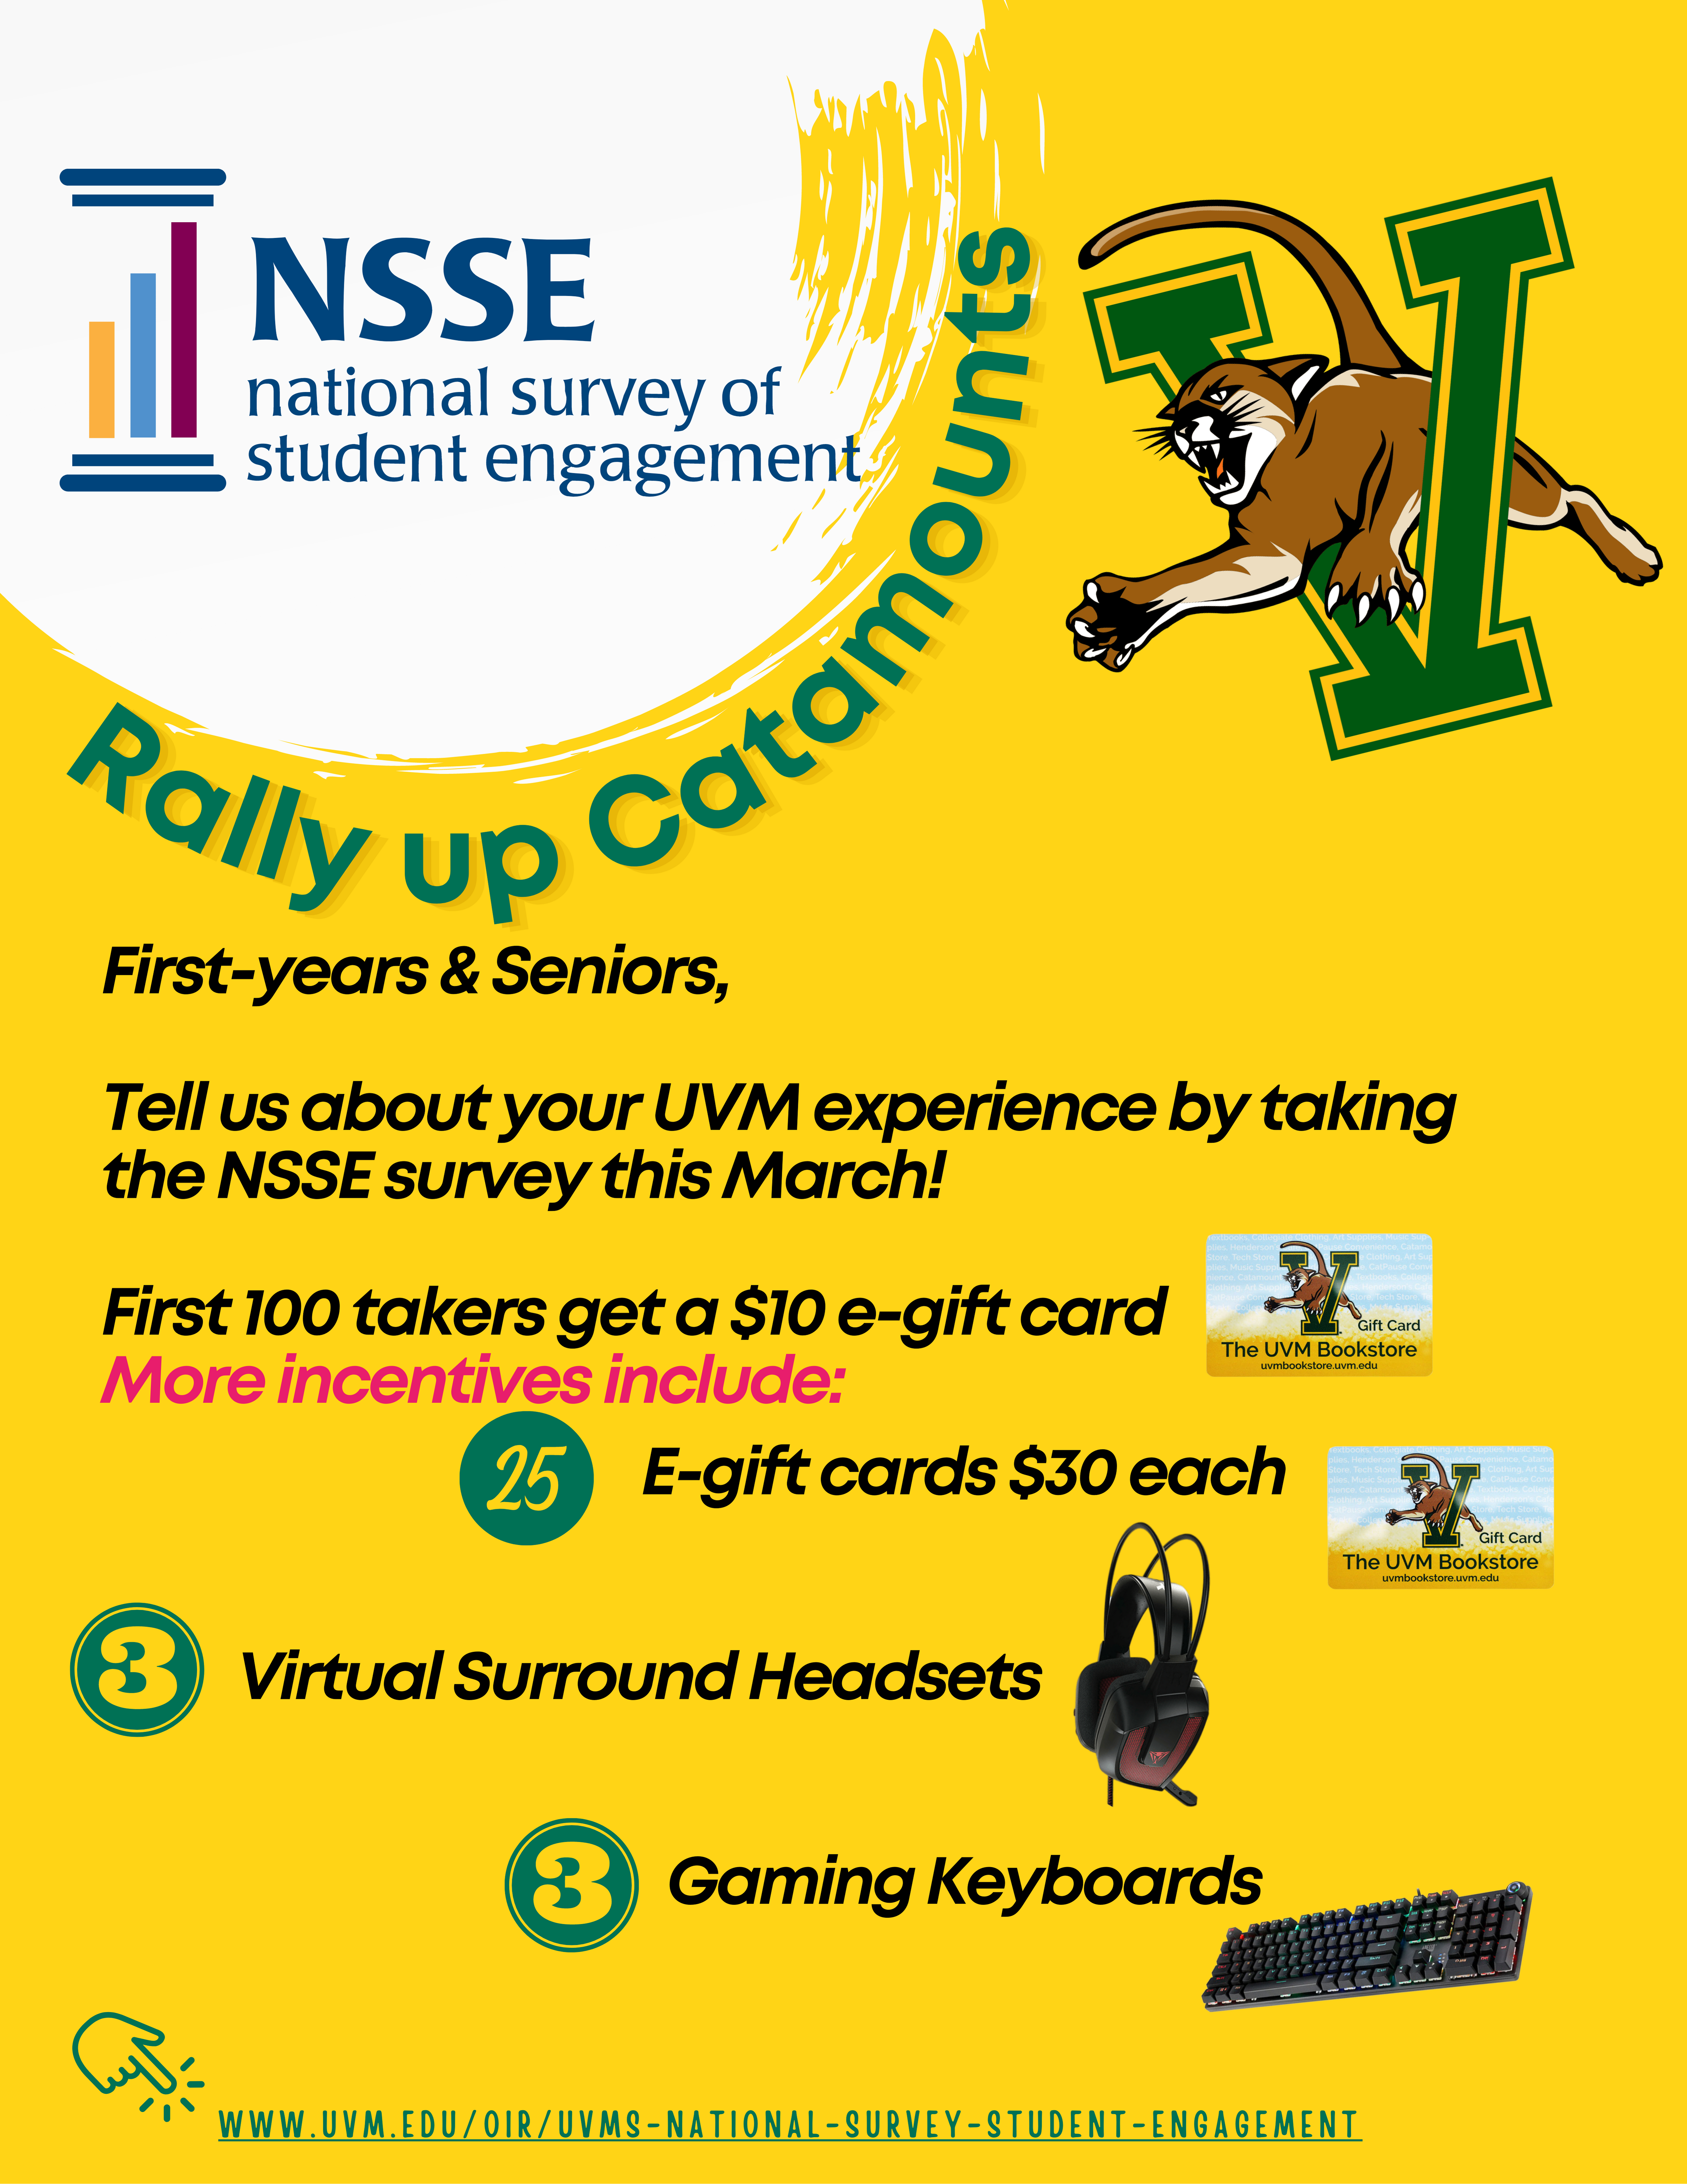 A portrait layout flyer that has some logos, pictures and text against a the UVM gold color background. The first logo is of NSSE placed at the top left corner against a while textured circle. Underneath the circle, the text says Rally up Catamounts. Next to the circle is UVM’s mascot catamount that appears to be pouncing out of an enlarged V alphabet symbolizing V for Vermont. The V alphabet appears in the UVM green color with UVM gold border. Below there is text on incentives that reads: Tell us about your UVM experience by taking the NSSE survey this March! First 100 takers get a $10 e-gift card. More incentives include 25 E-gift cards $30 each, 3 Virtual Surround Headsets and 3 Gaming Keyboards. Each of these incentives are accompanied by their photo – a gift card that has UVM catamount mascot pouncing out of UVM V alphabet icon and says UVM Bookstore, a black and deep red color headset and a black color keyboard in which keys appear backlit by rainbow-colored lights. At the very bottom of the flyer is a link to UVM’s NSSE website that reads: www.uvm.edu/oir/uvms-national-survey-student-engagement